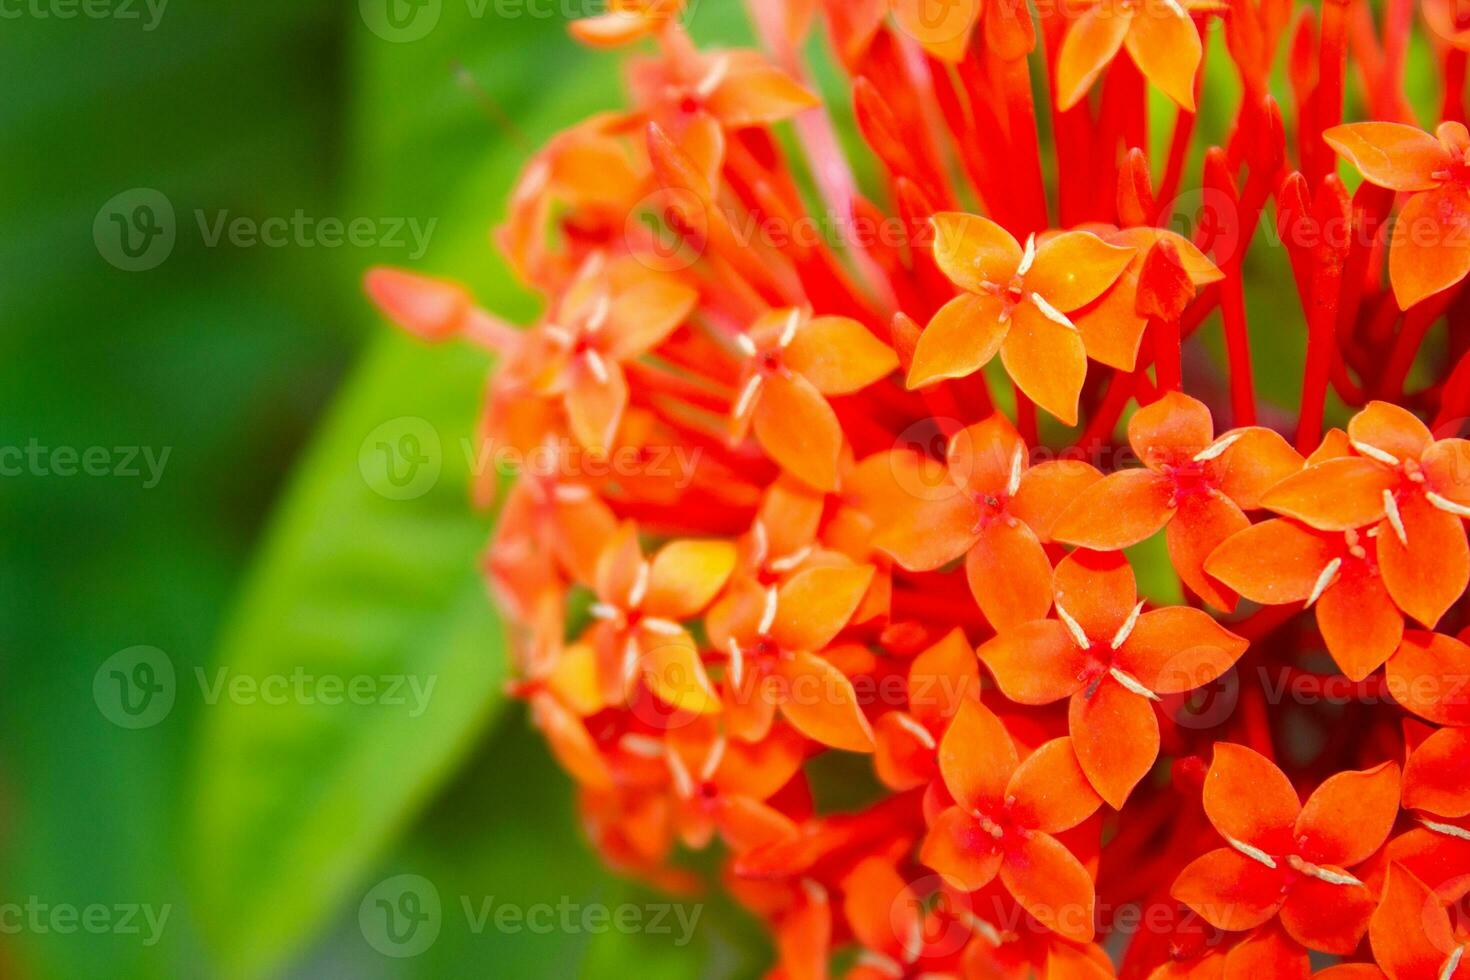 The Radiant Indian Rongon Flower. The Indian Rongon flower, scientifically known as Ixora coccinea photo